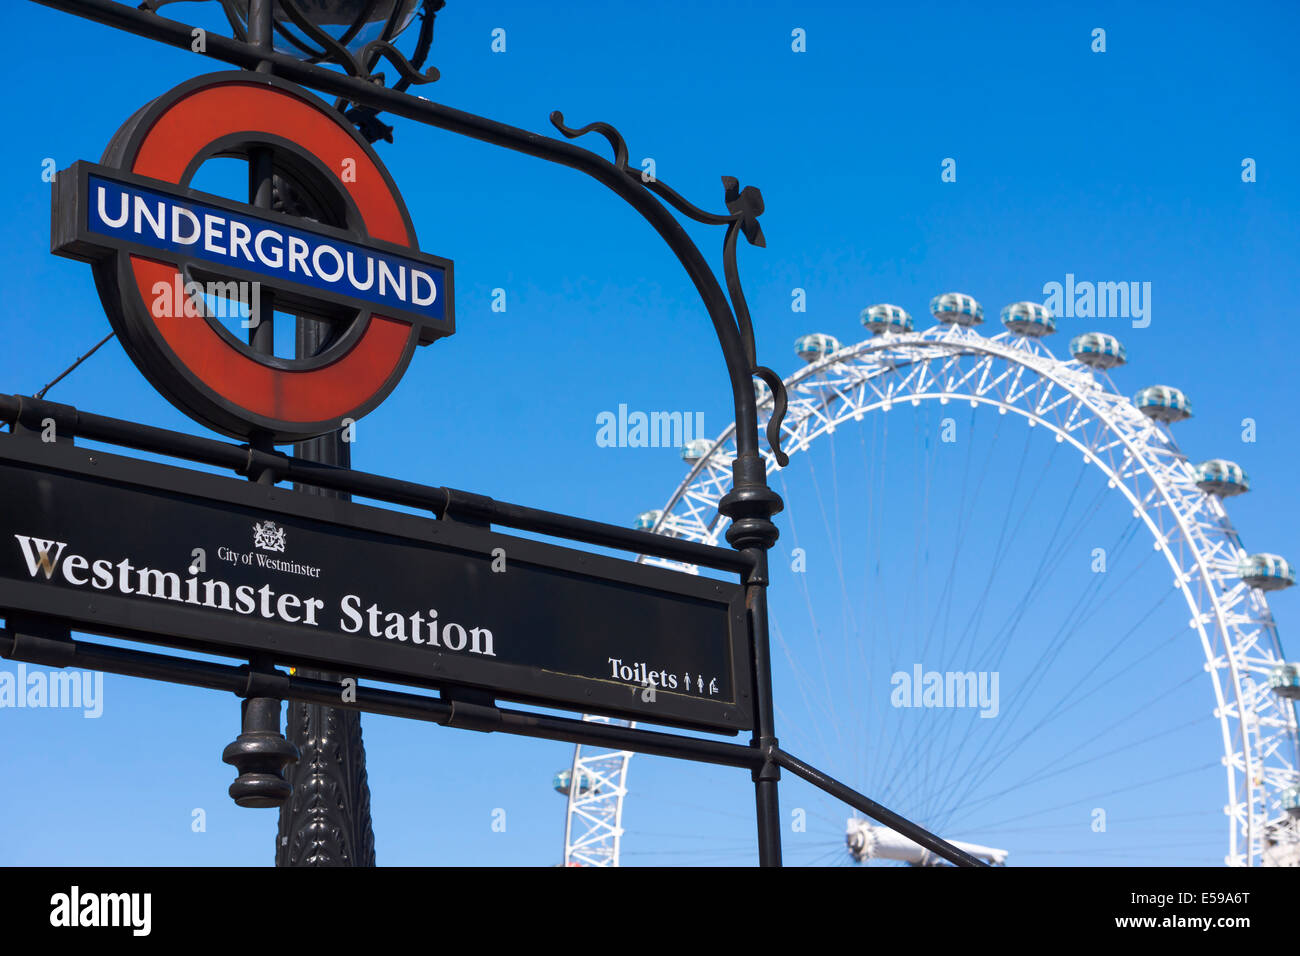 England, London,Westminster, view to the big wheel 'London Eye' and underground sign Stock Photo